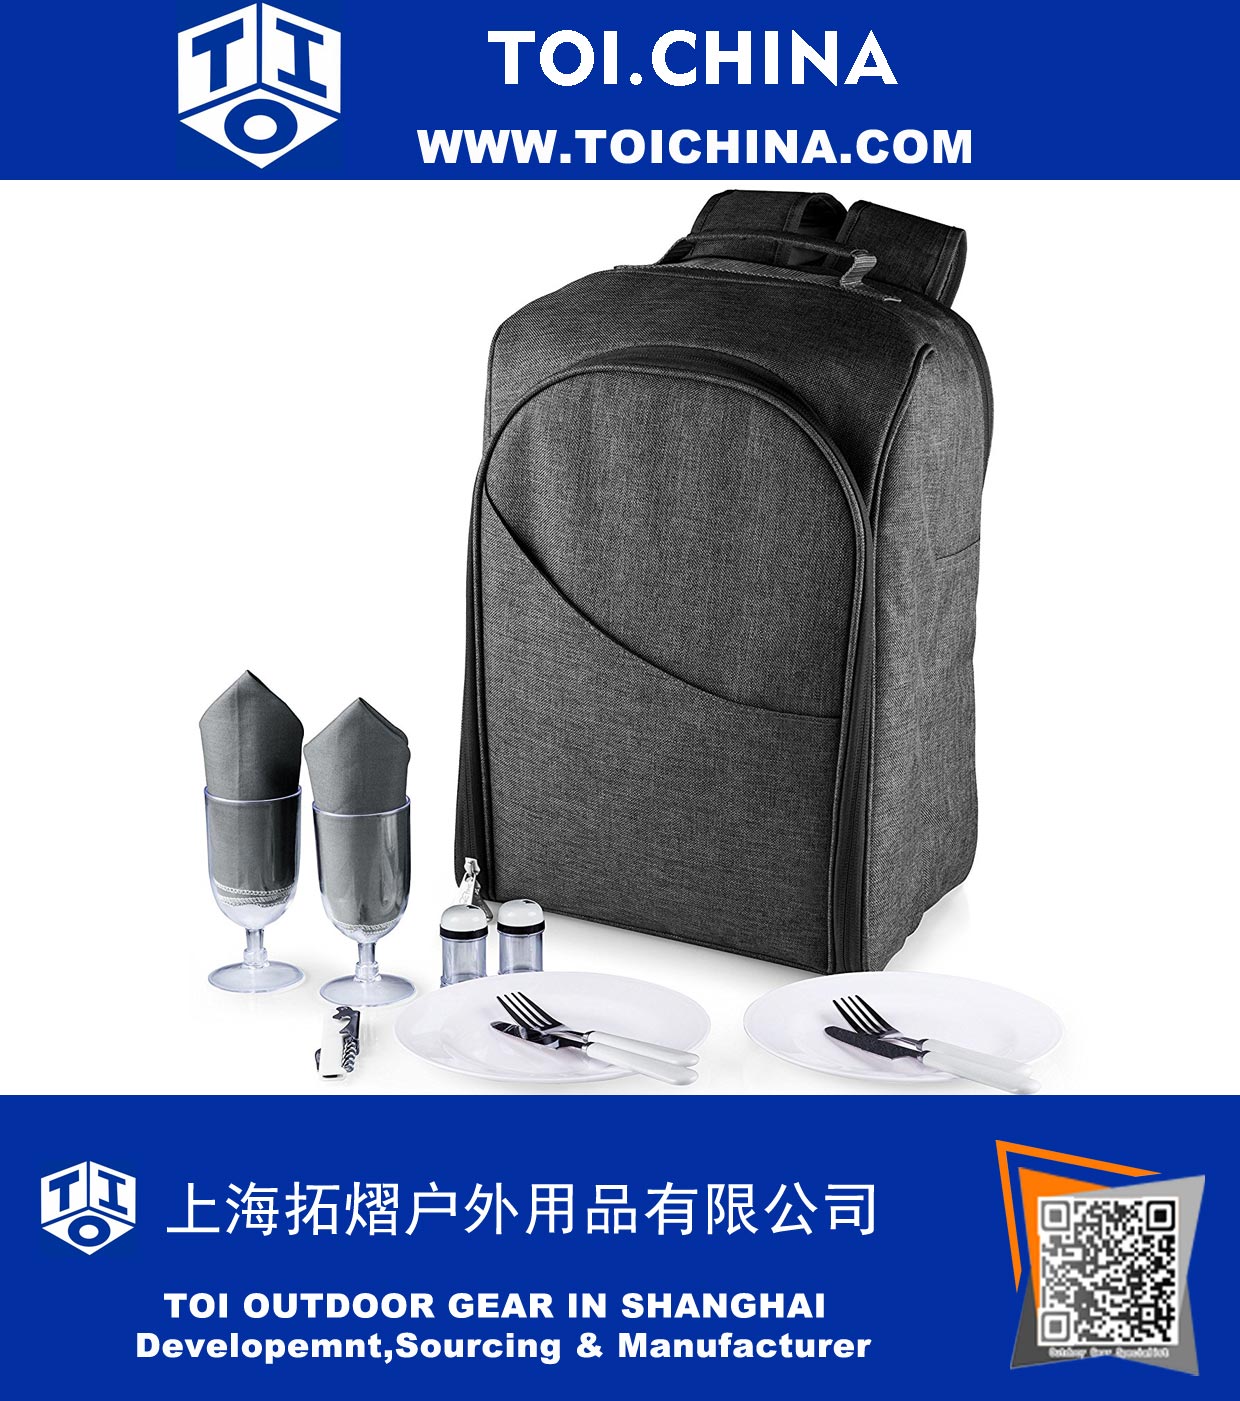 Insulated Backpack Cooler